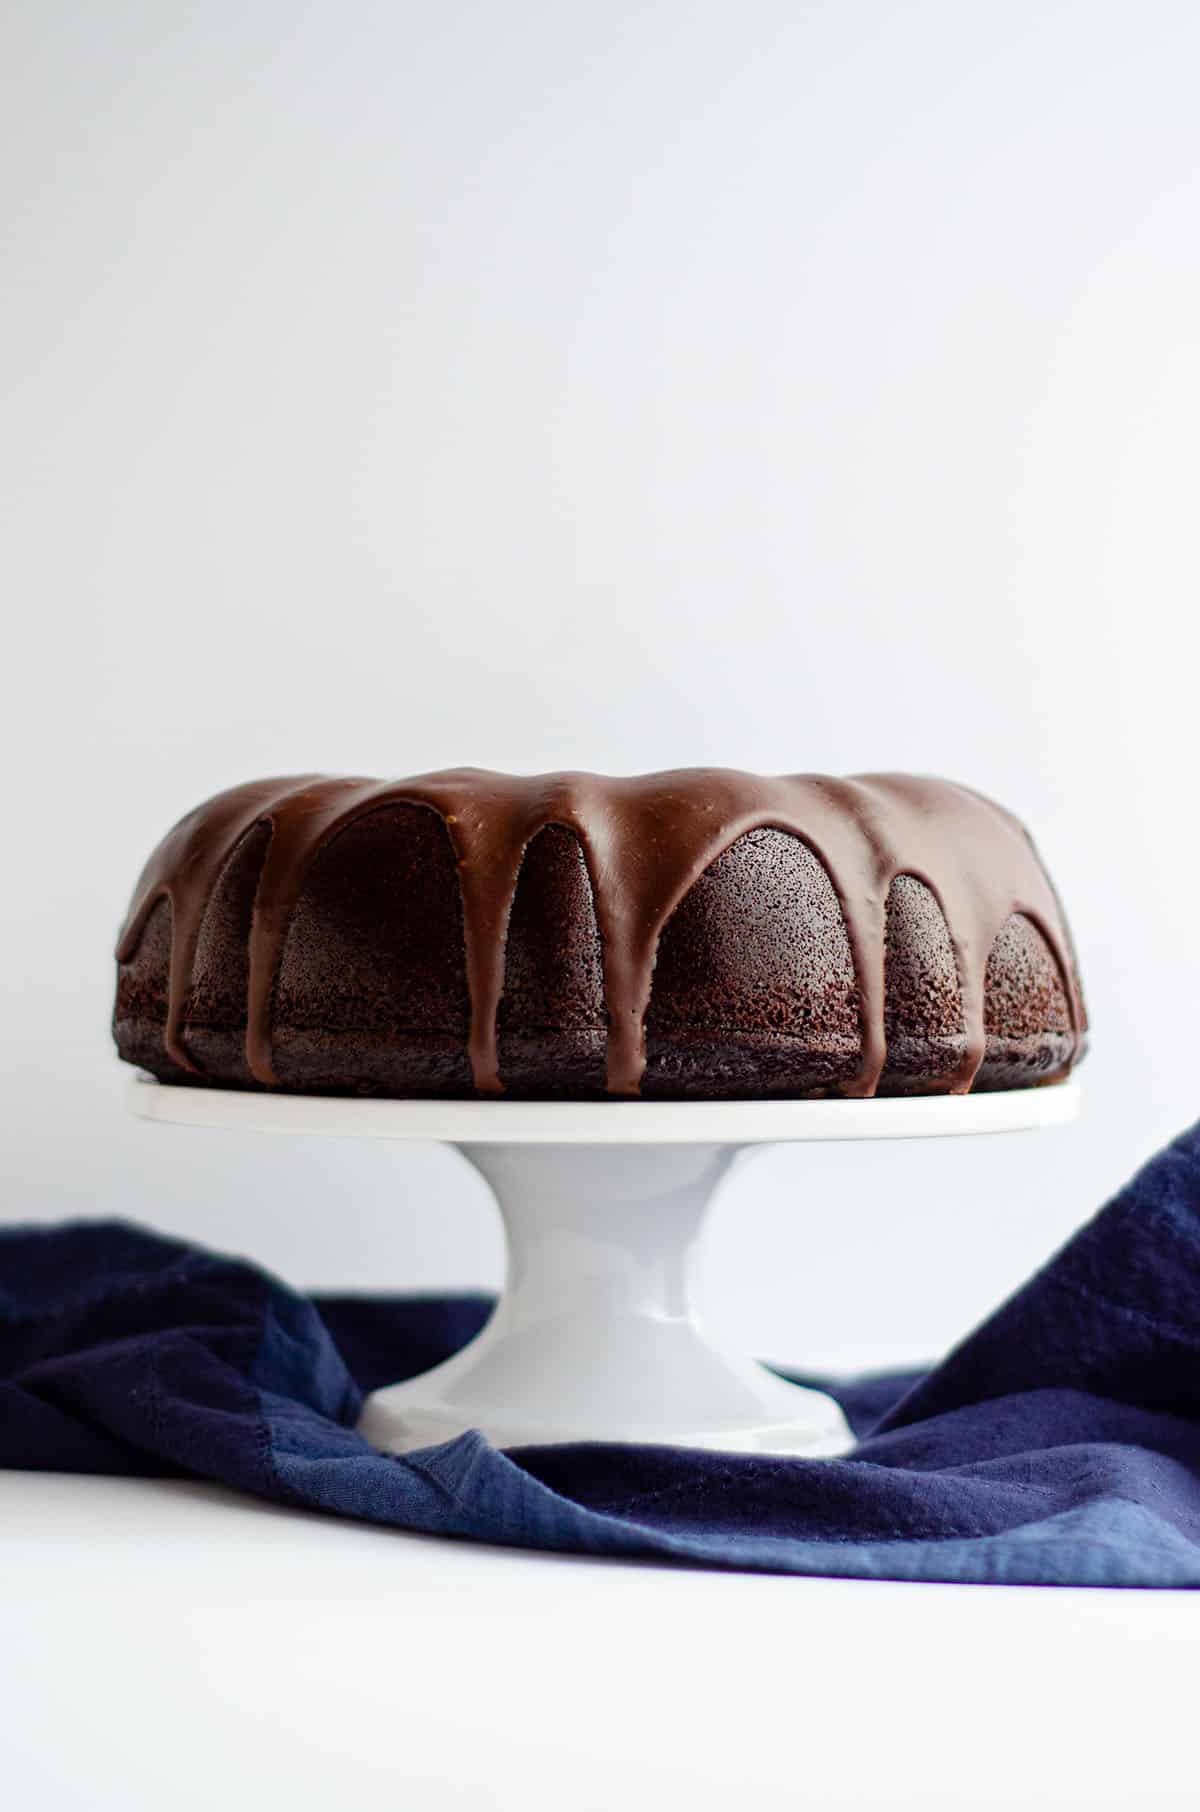 A simple chocolate cake made with rich, deep flavors and topped with a smooth chocolate ganache. via @frshaprilflours